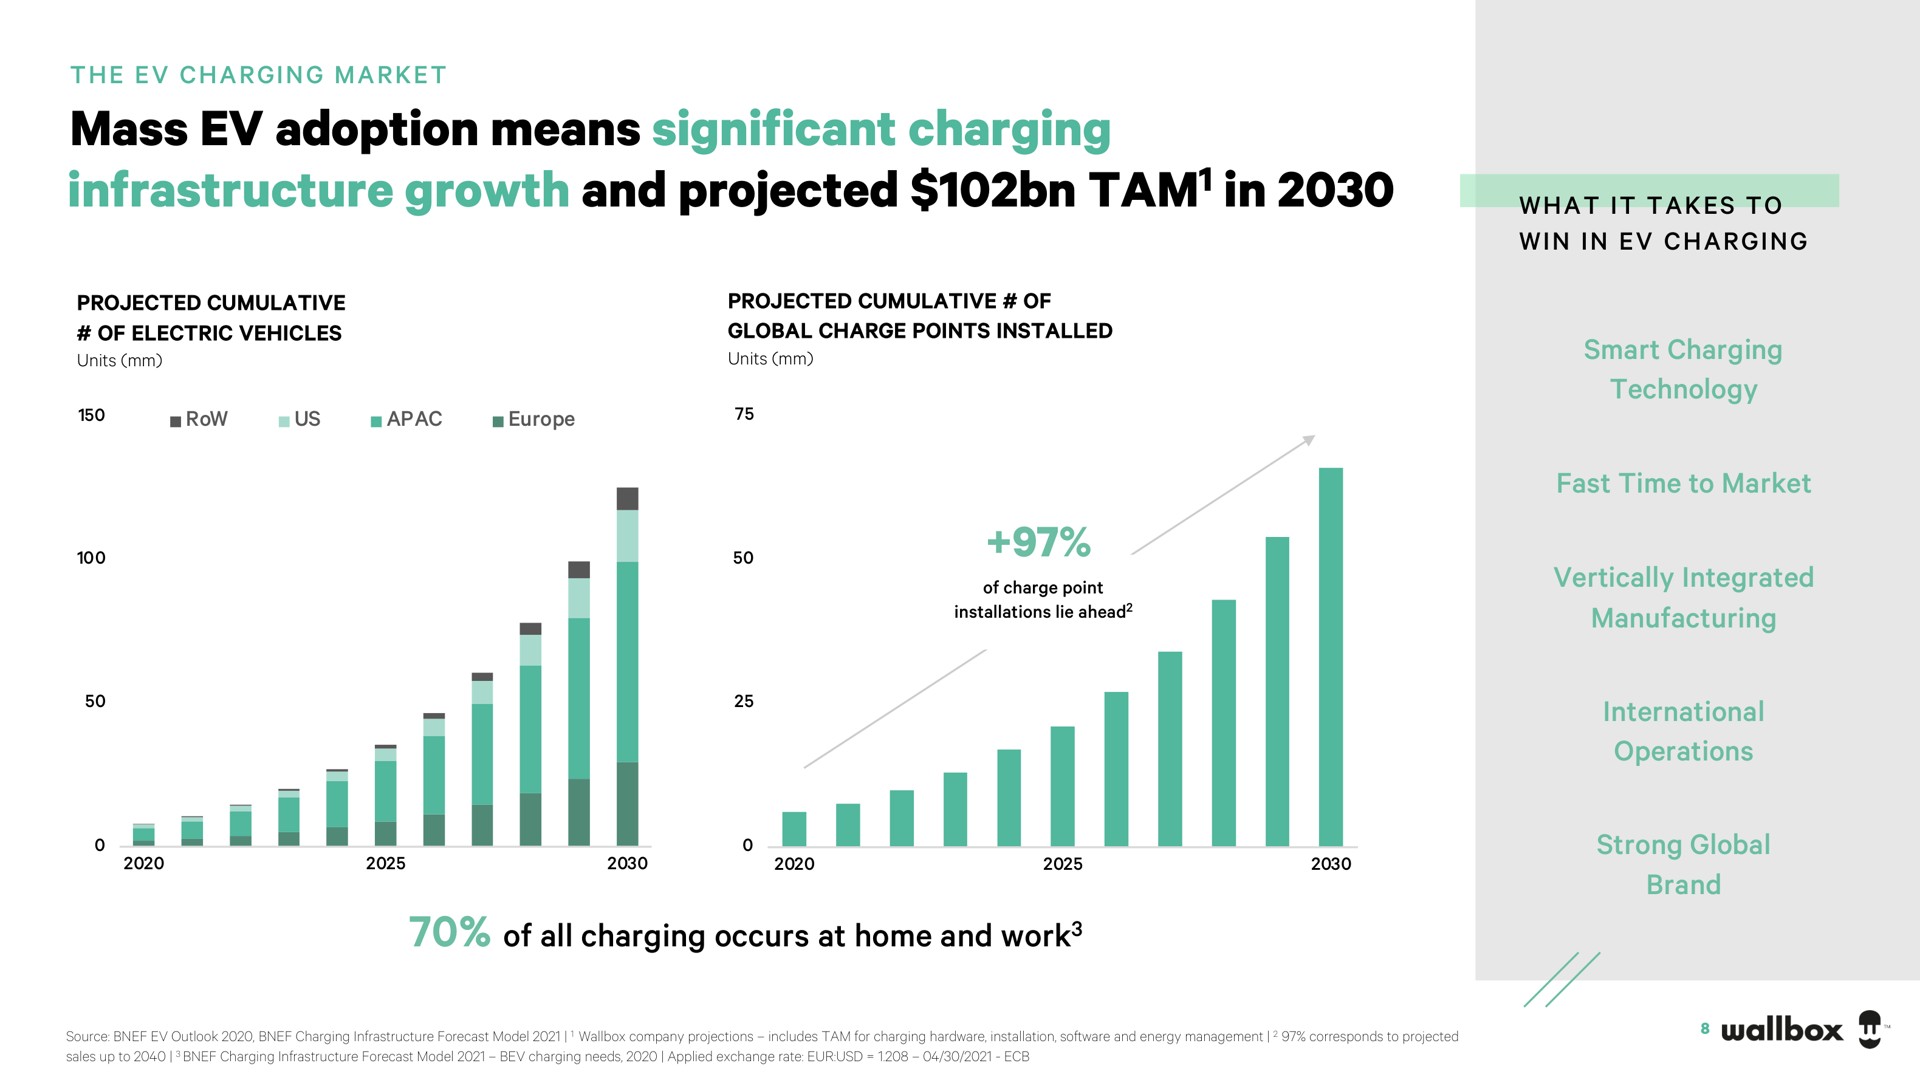 mass adoption means significant charging infrastructure growth and projected tam in tam | Wallbox